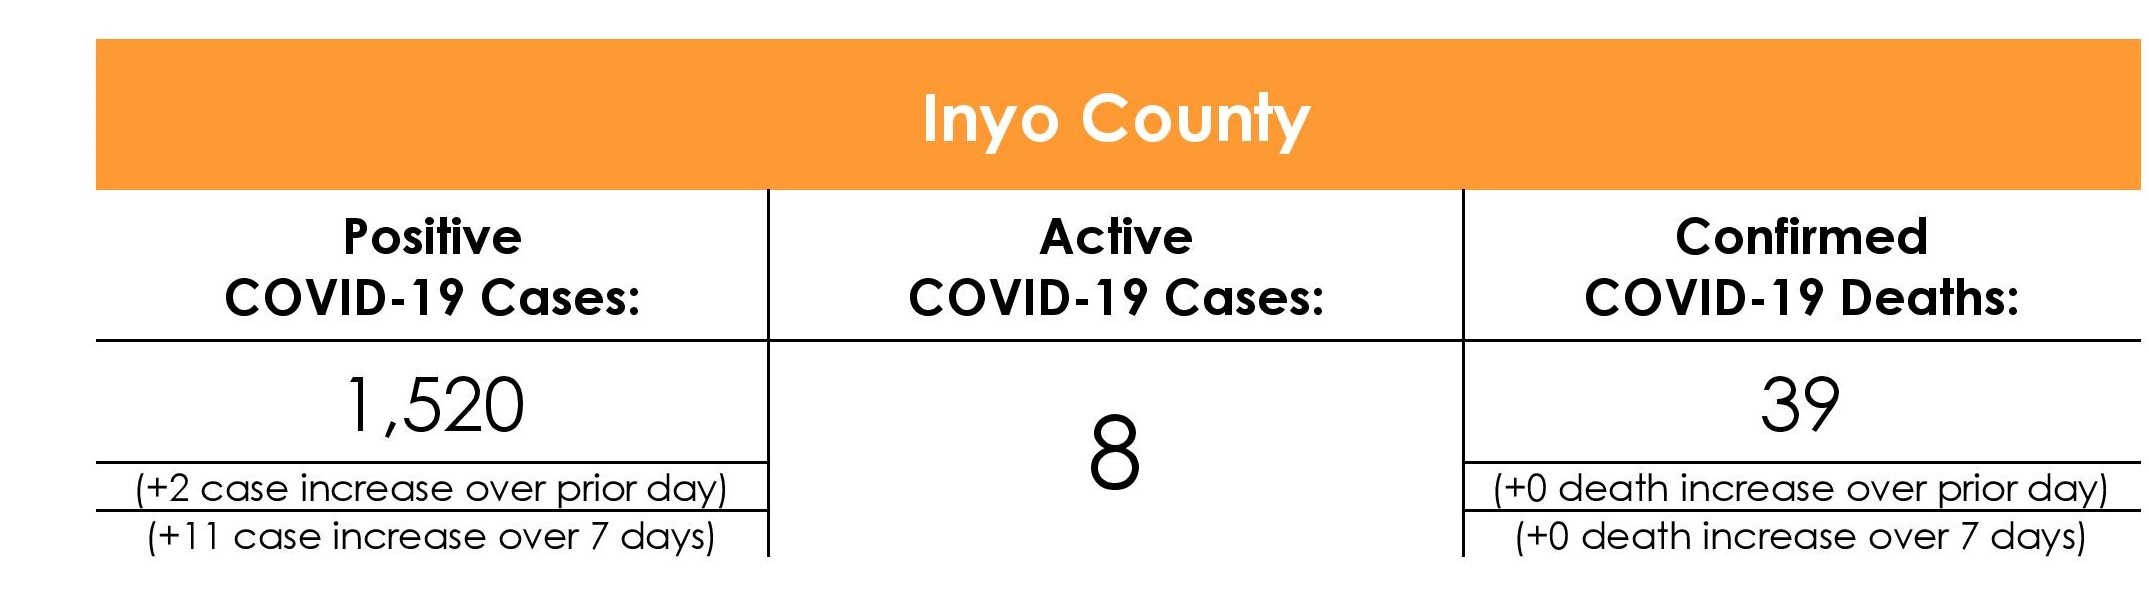 Inyo County COVID-19 Case Rate as of August 18, 2021